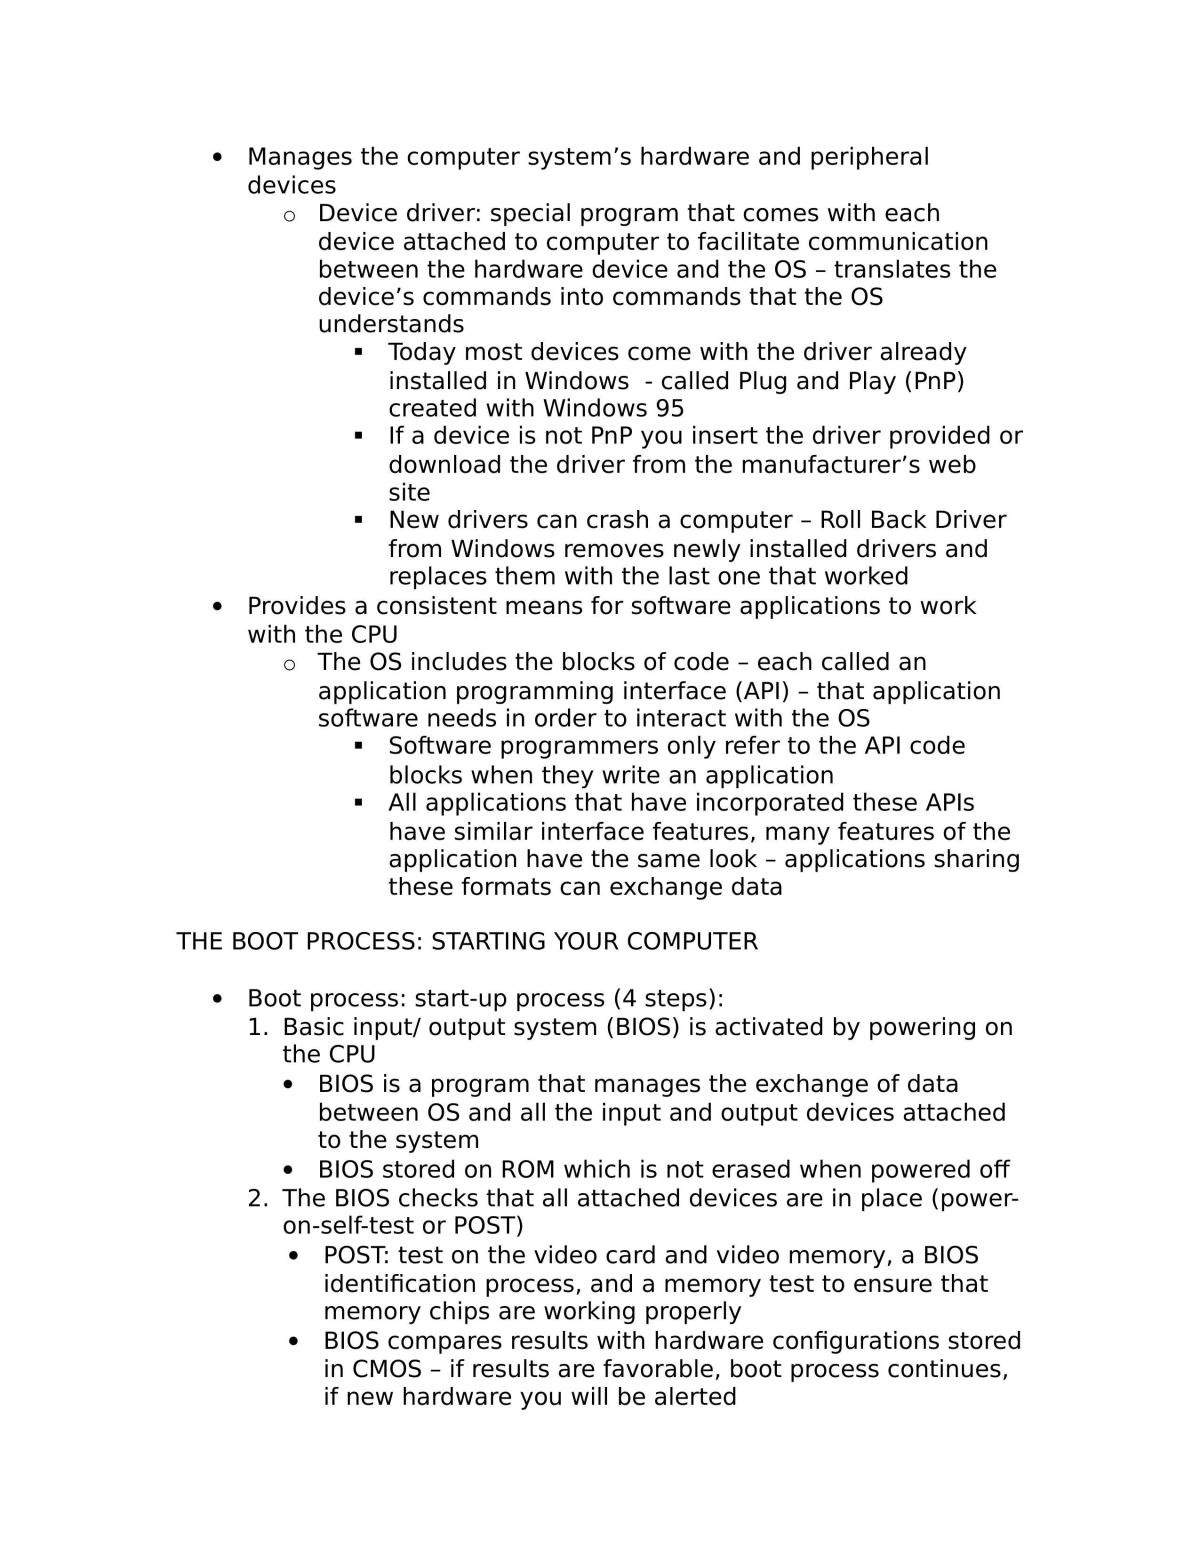 BTM 200 Study Guide - Page 25